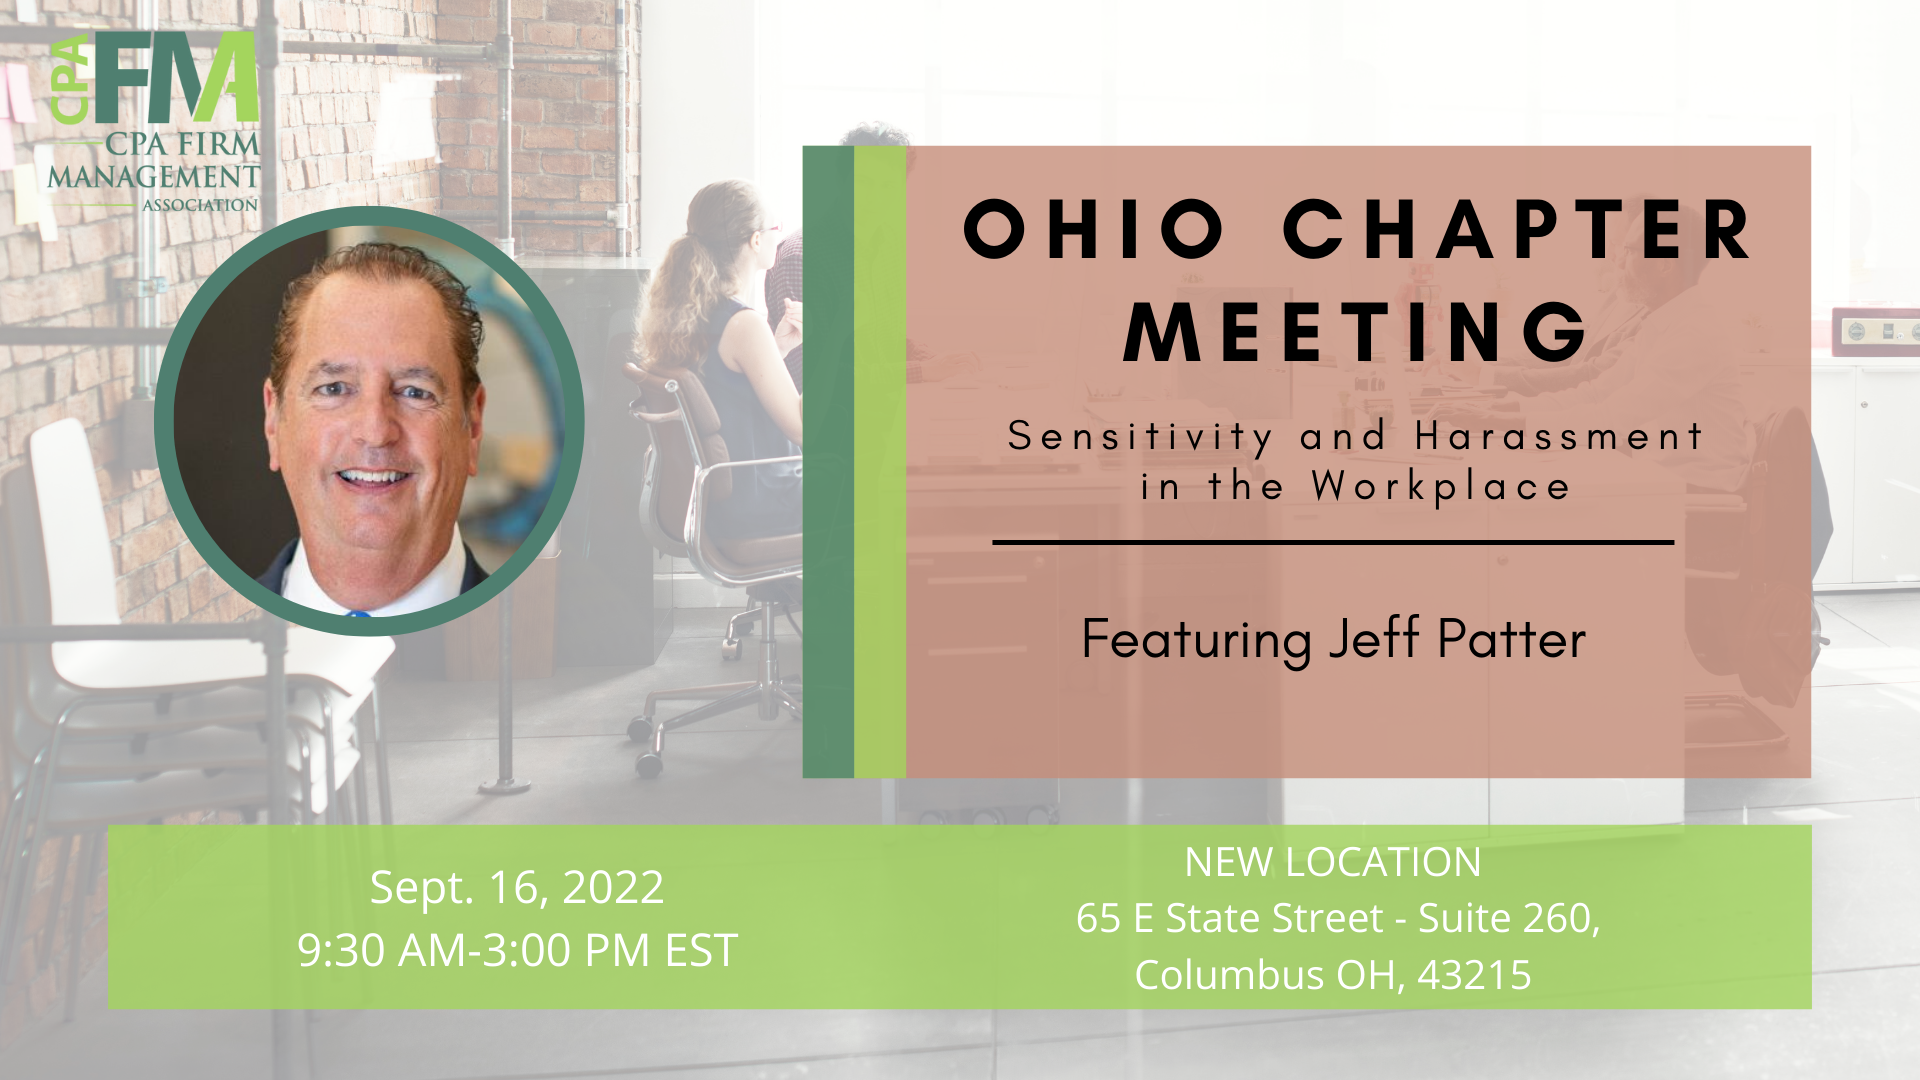 Ohio Chapter Meeting: Sensitivity and Harassment in the Workplace Featuring Jeff Patter